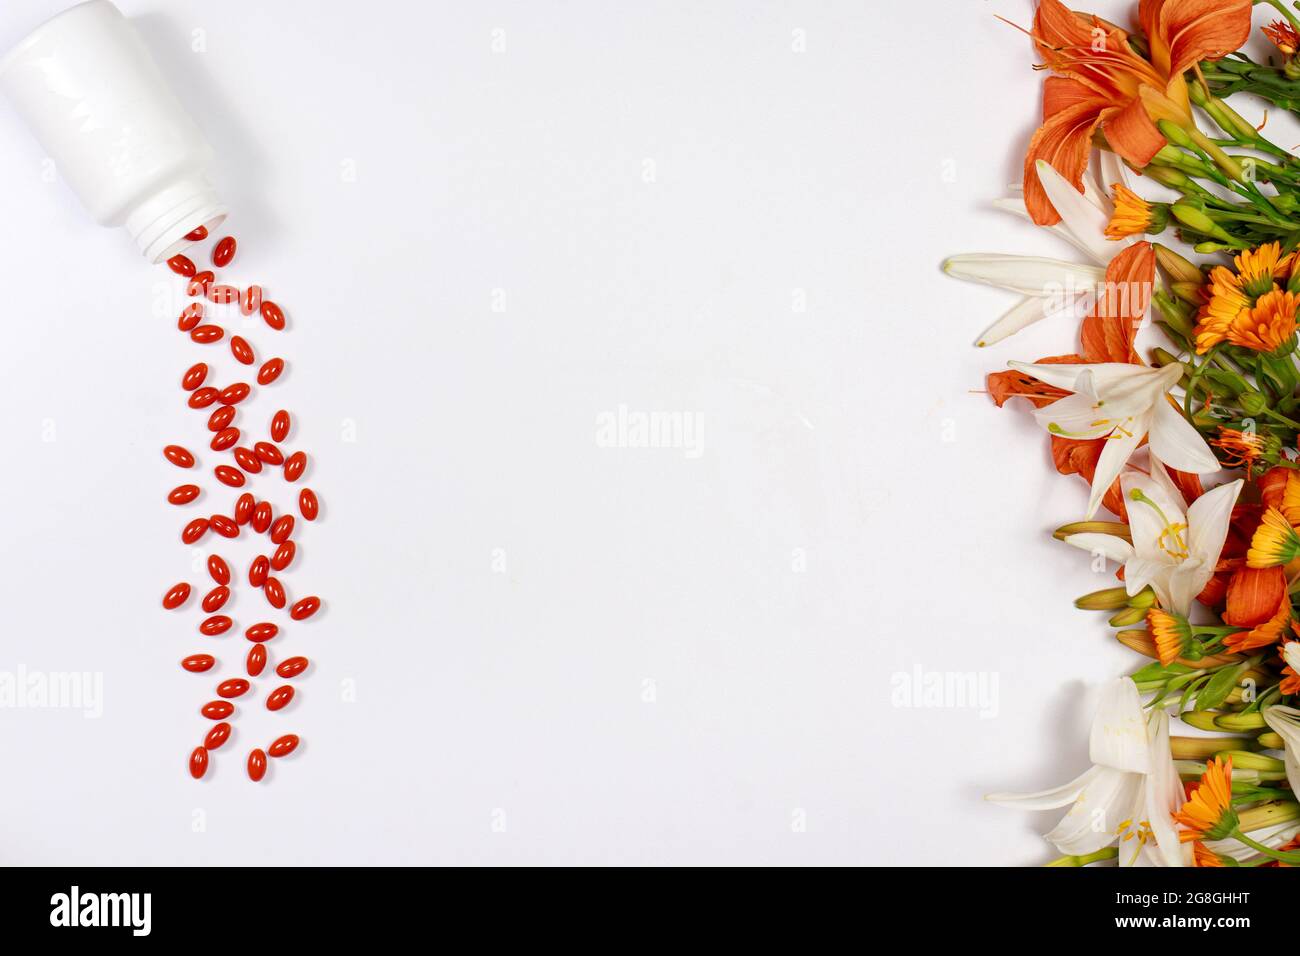 Orange capsules of lutein and medicinal plants on a white